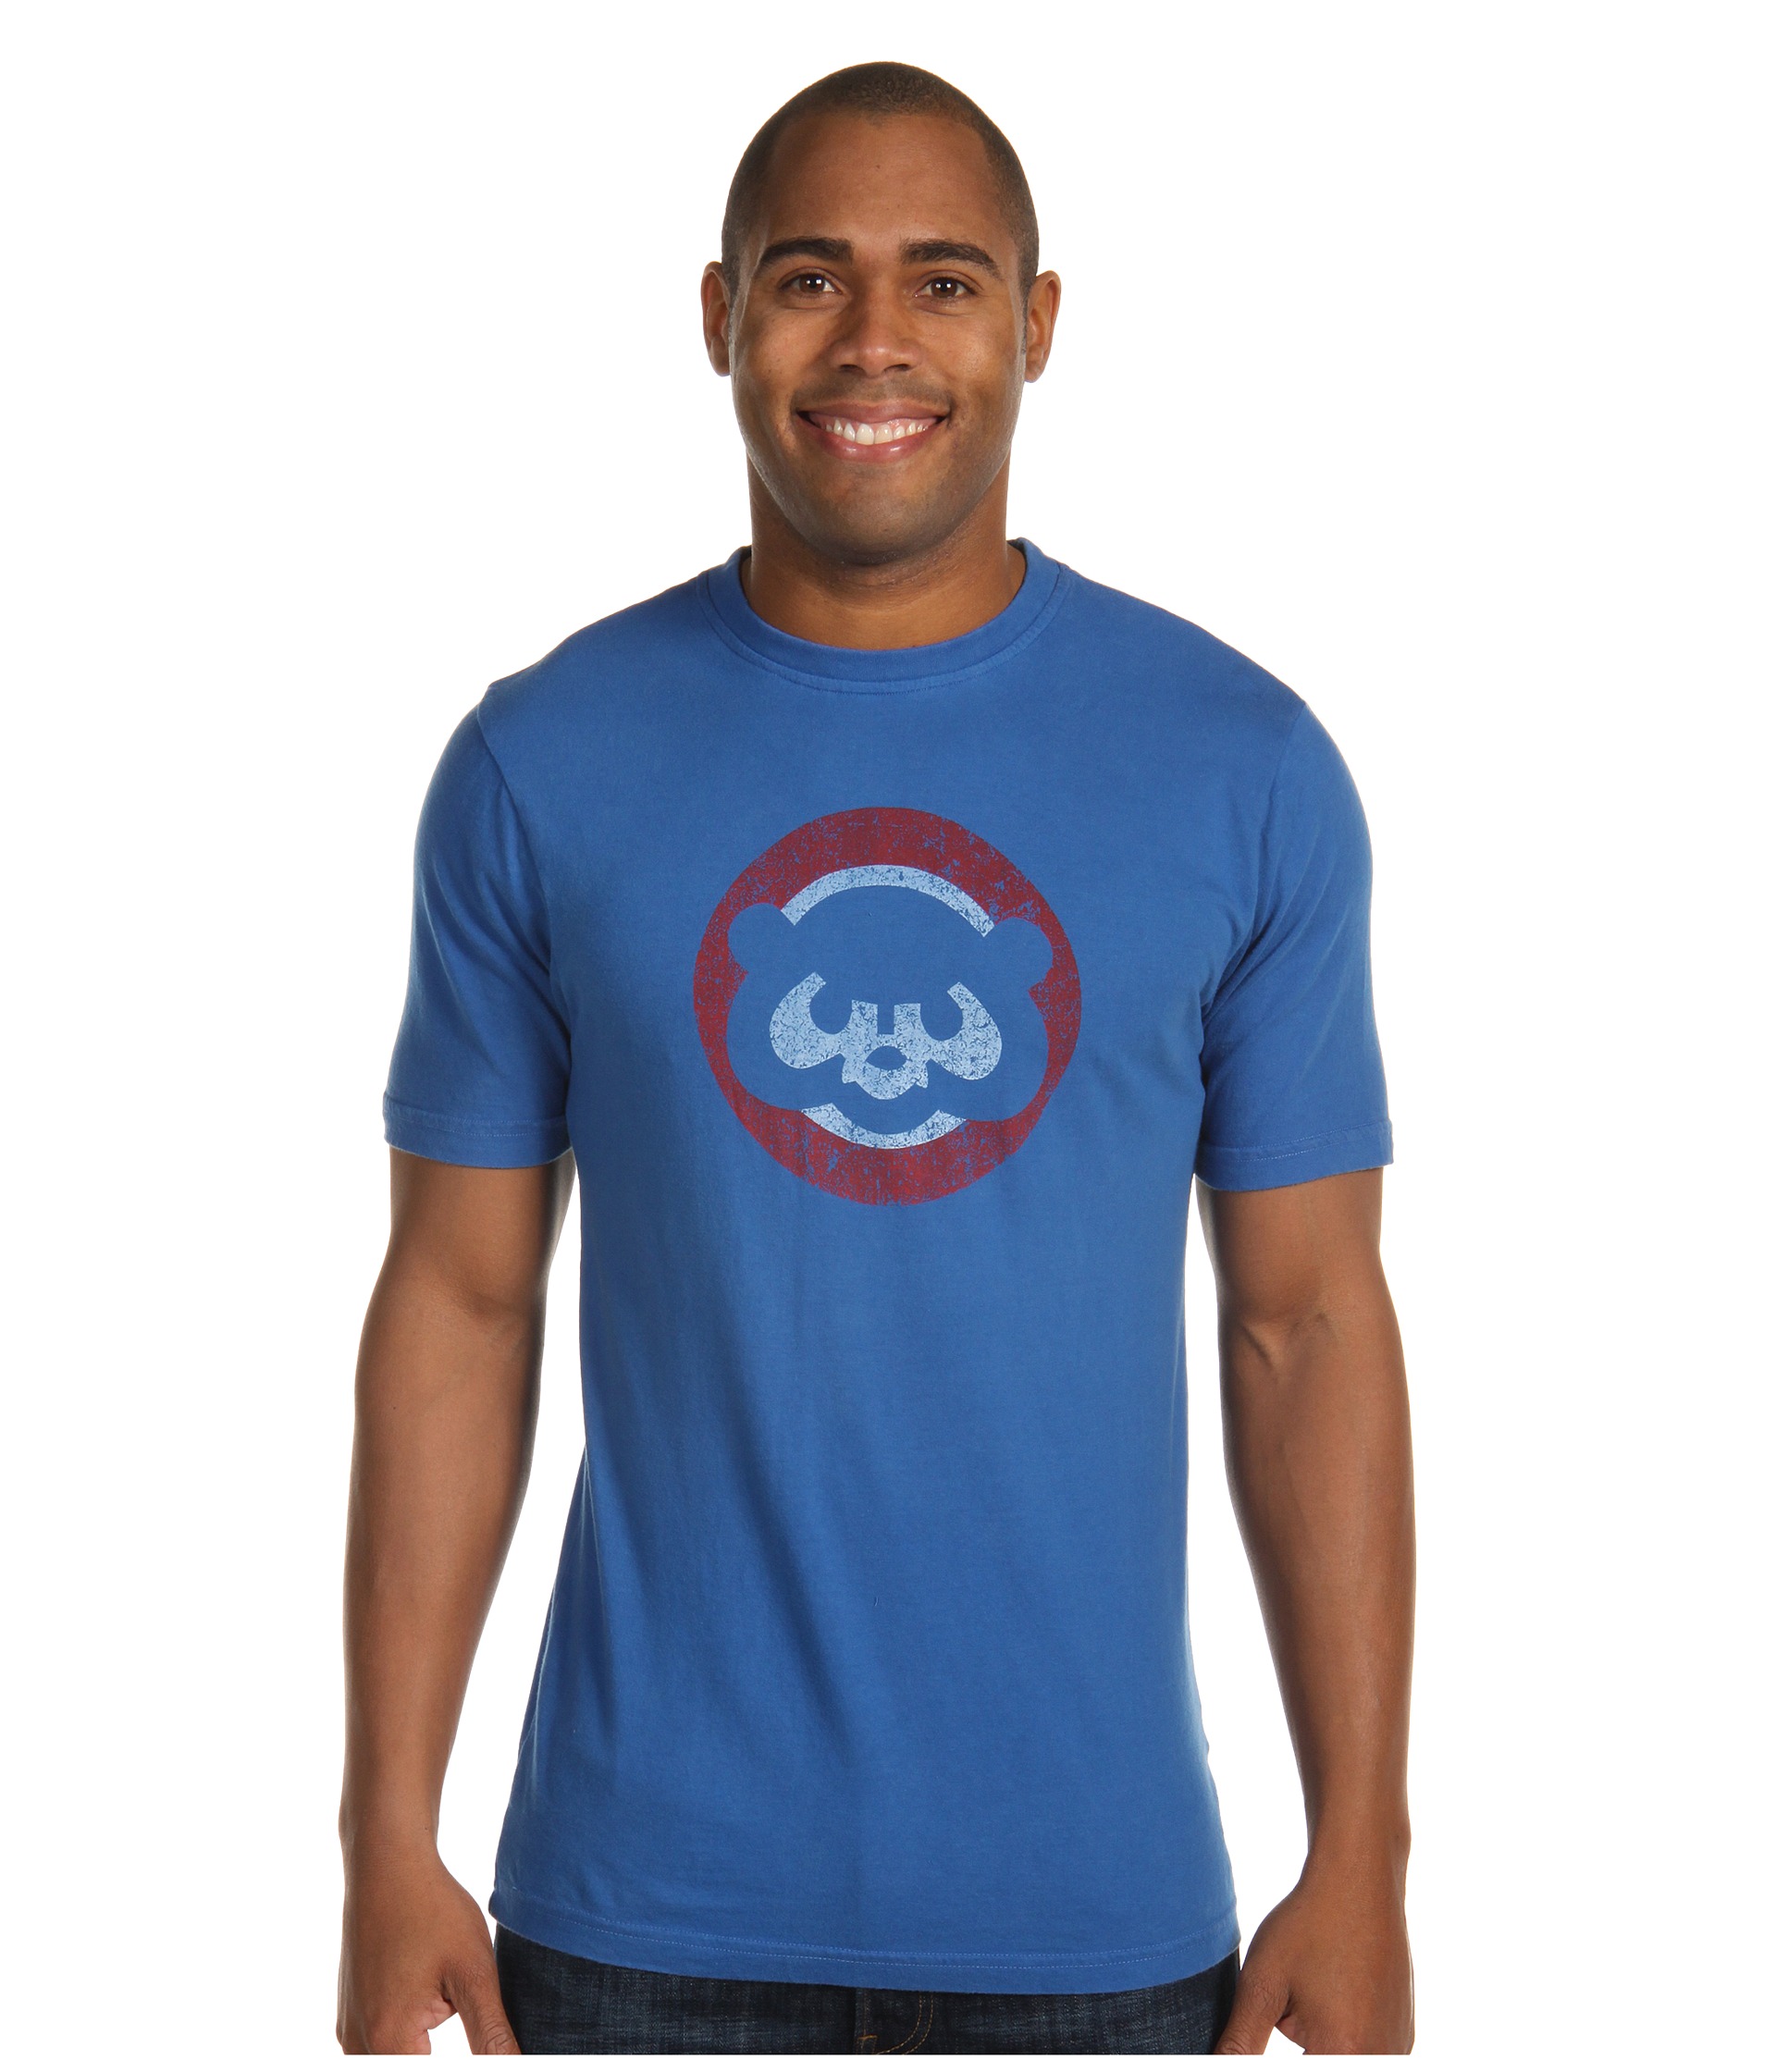 Red Jacket Chicago Cubs Brass Tacks Tee $11.99 (  MSRP $38.00)